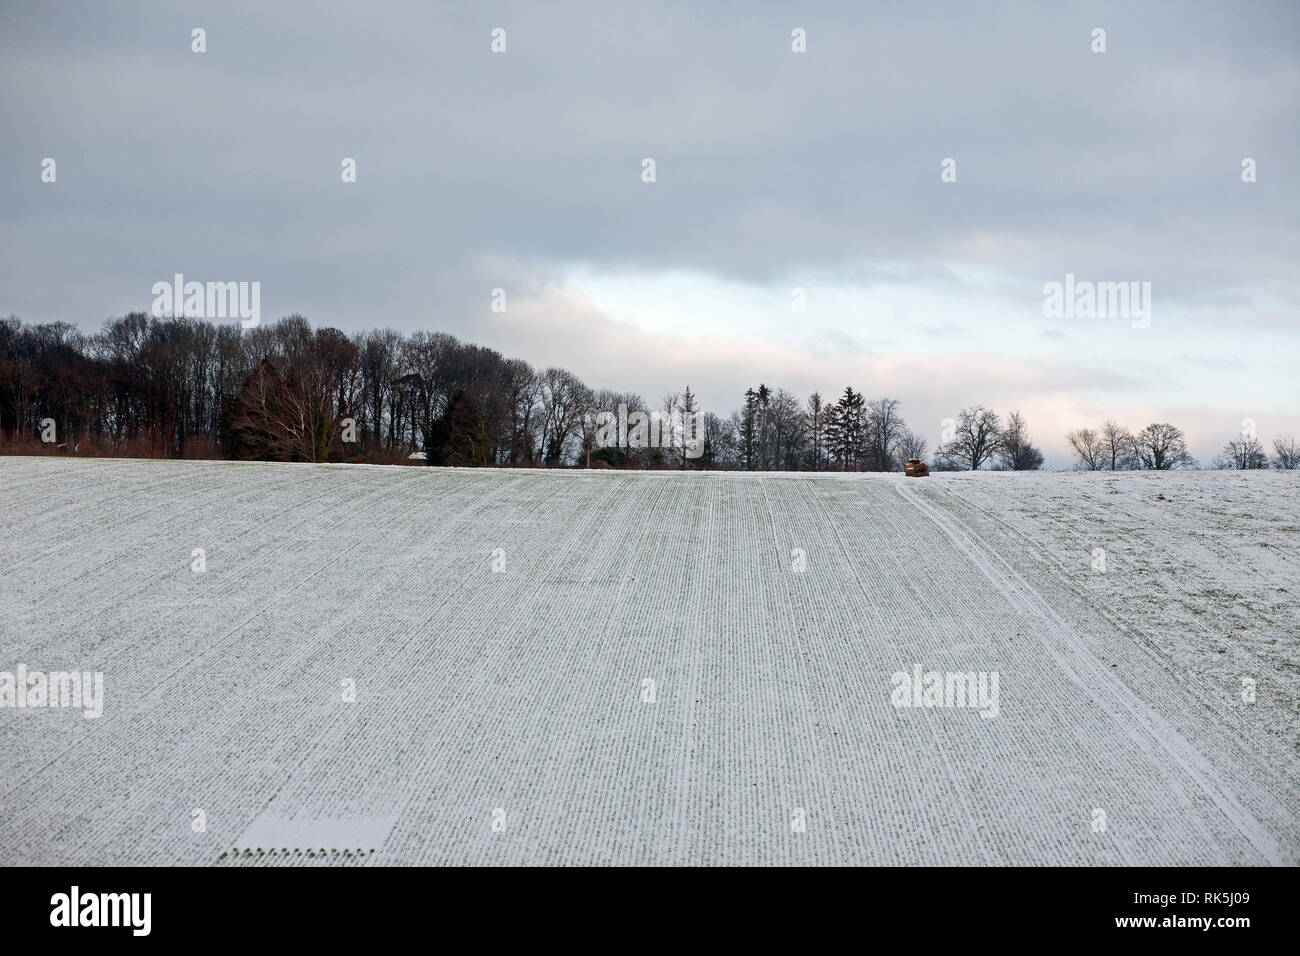 Snowfield with tracks Stock Photo